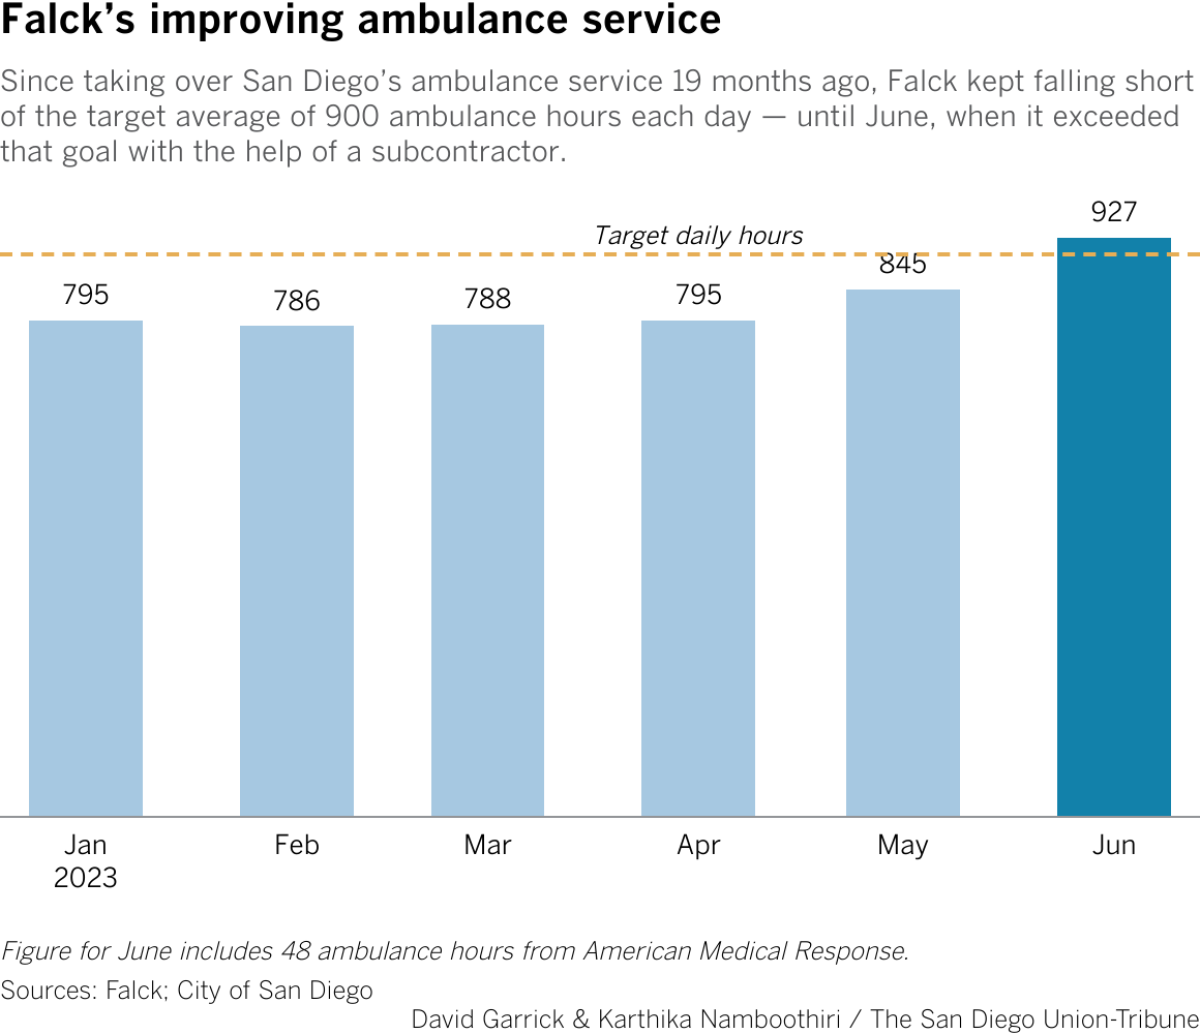 Since taking over San Diego’s ambulance service 19 months ago, Falck kept falling short of the target average of 900 ambulance hours each day — until June, when it exceeded that goal with the help of a subcontractor.